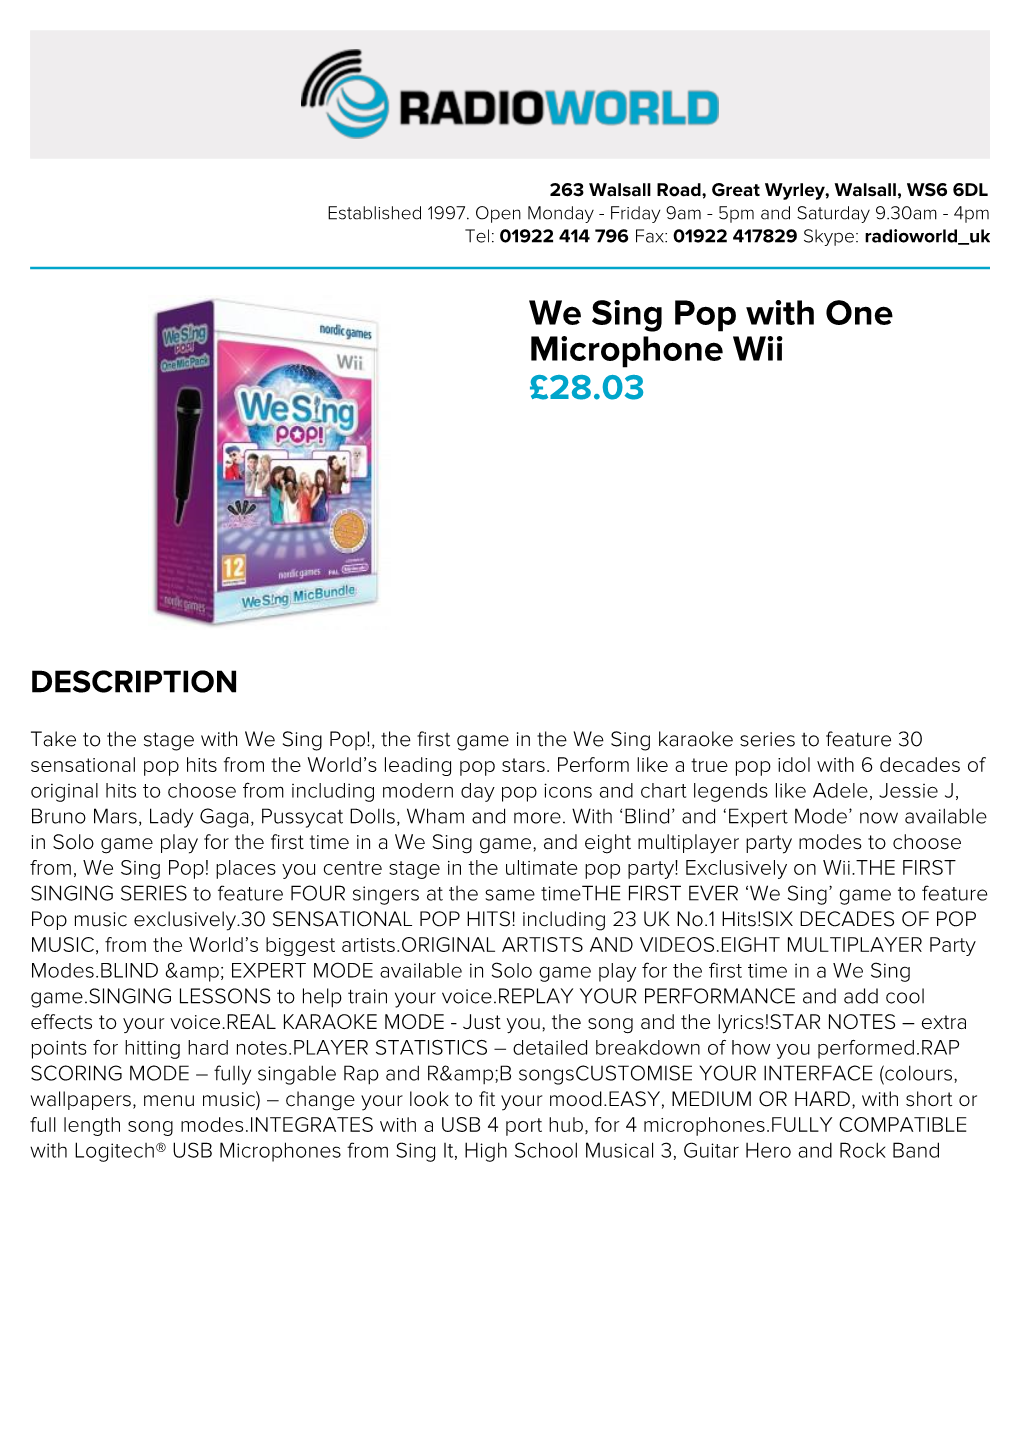 We Sing Pop with One Microphone Wii £28.03